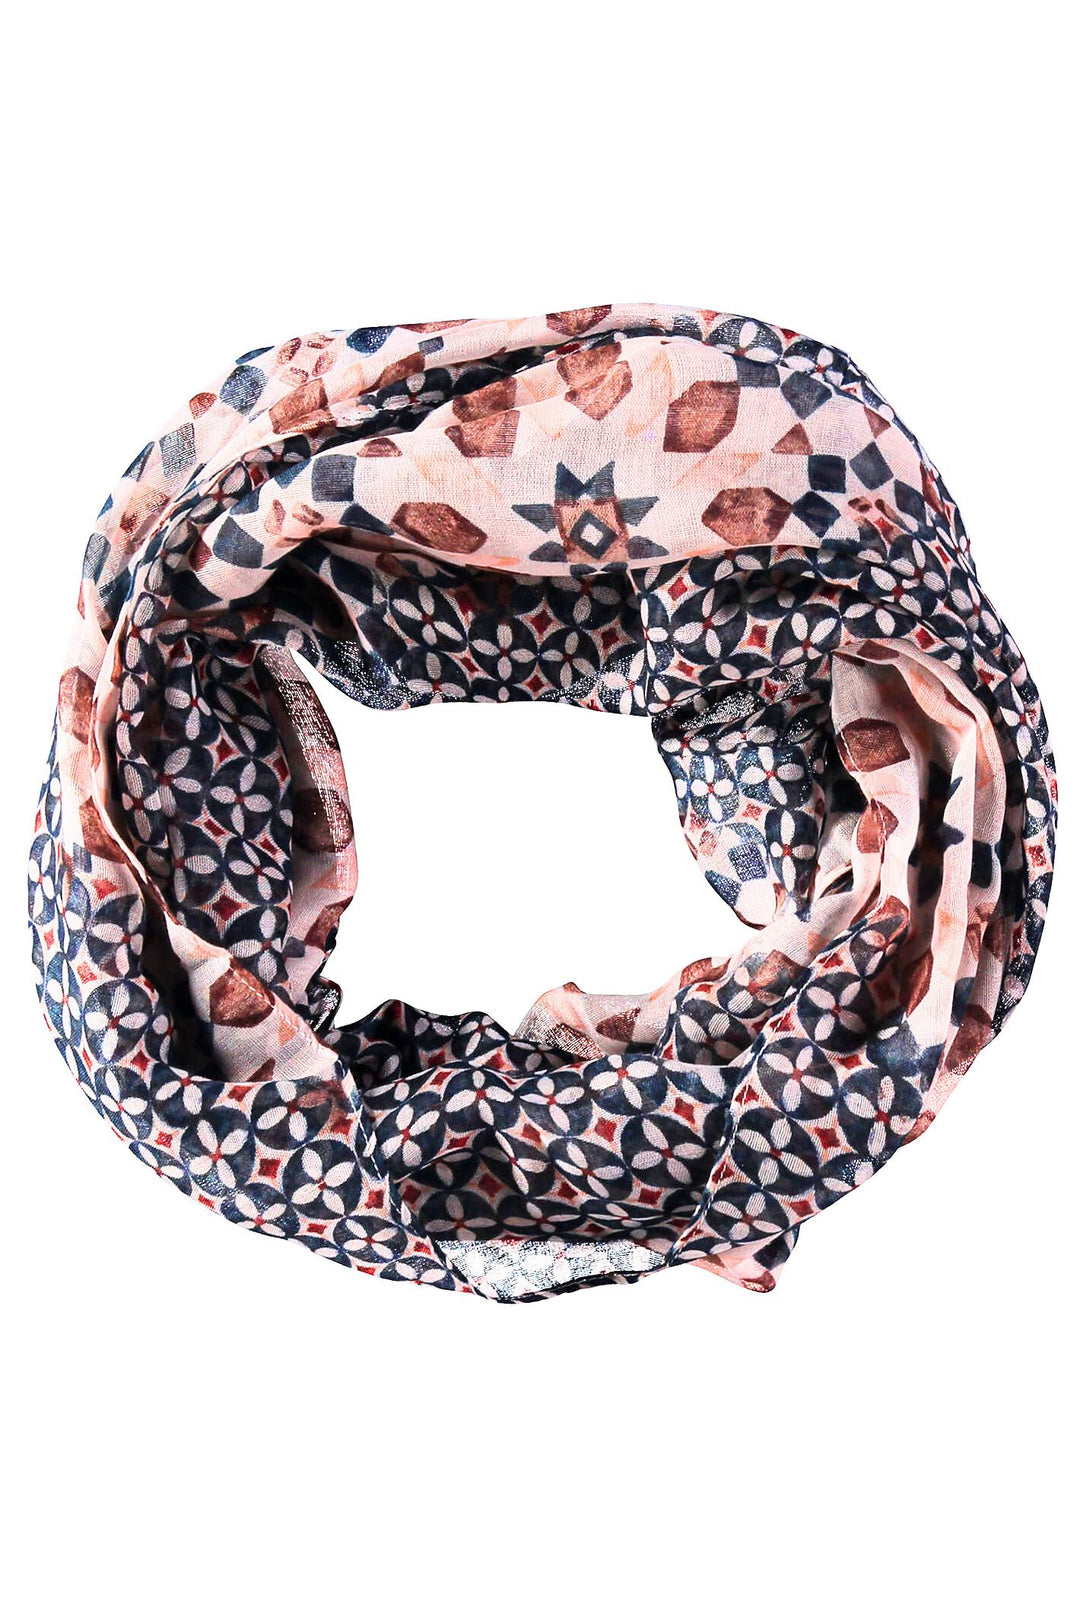 Gerry Weber 301029 72044 9088 Navy Mosaic Print Scarf - Experience Boutique